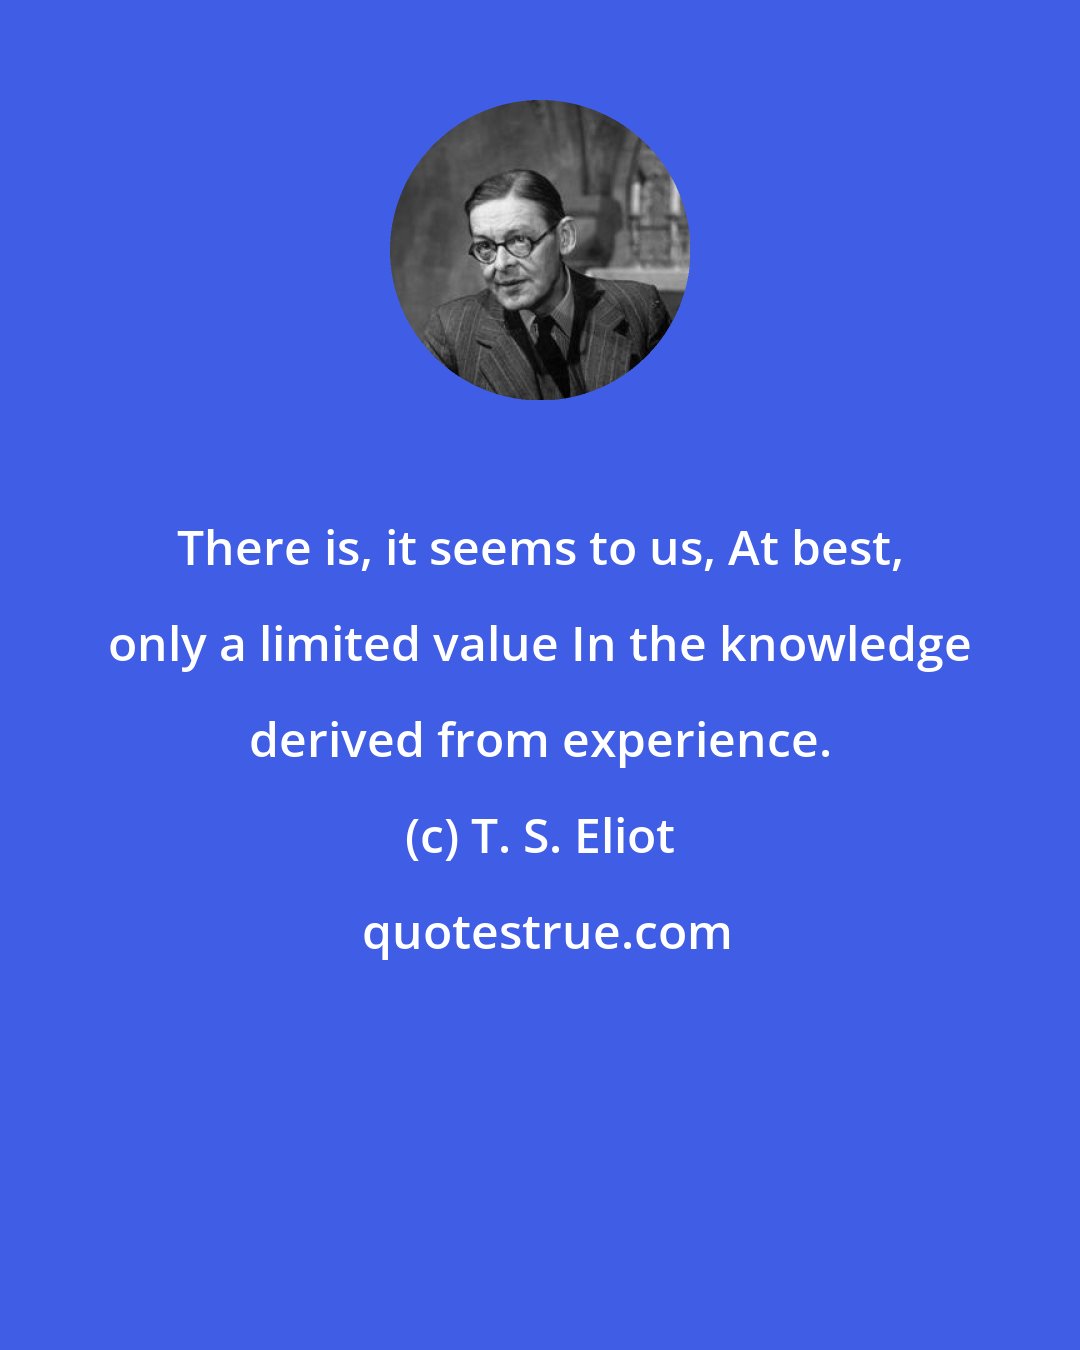 T. S. Eliot: There is, it seems to us, At best, only a limited value In the knowledge derived from experience.